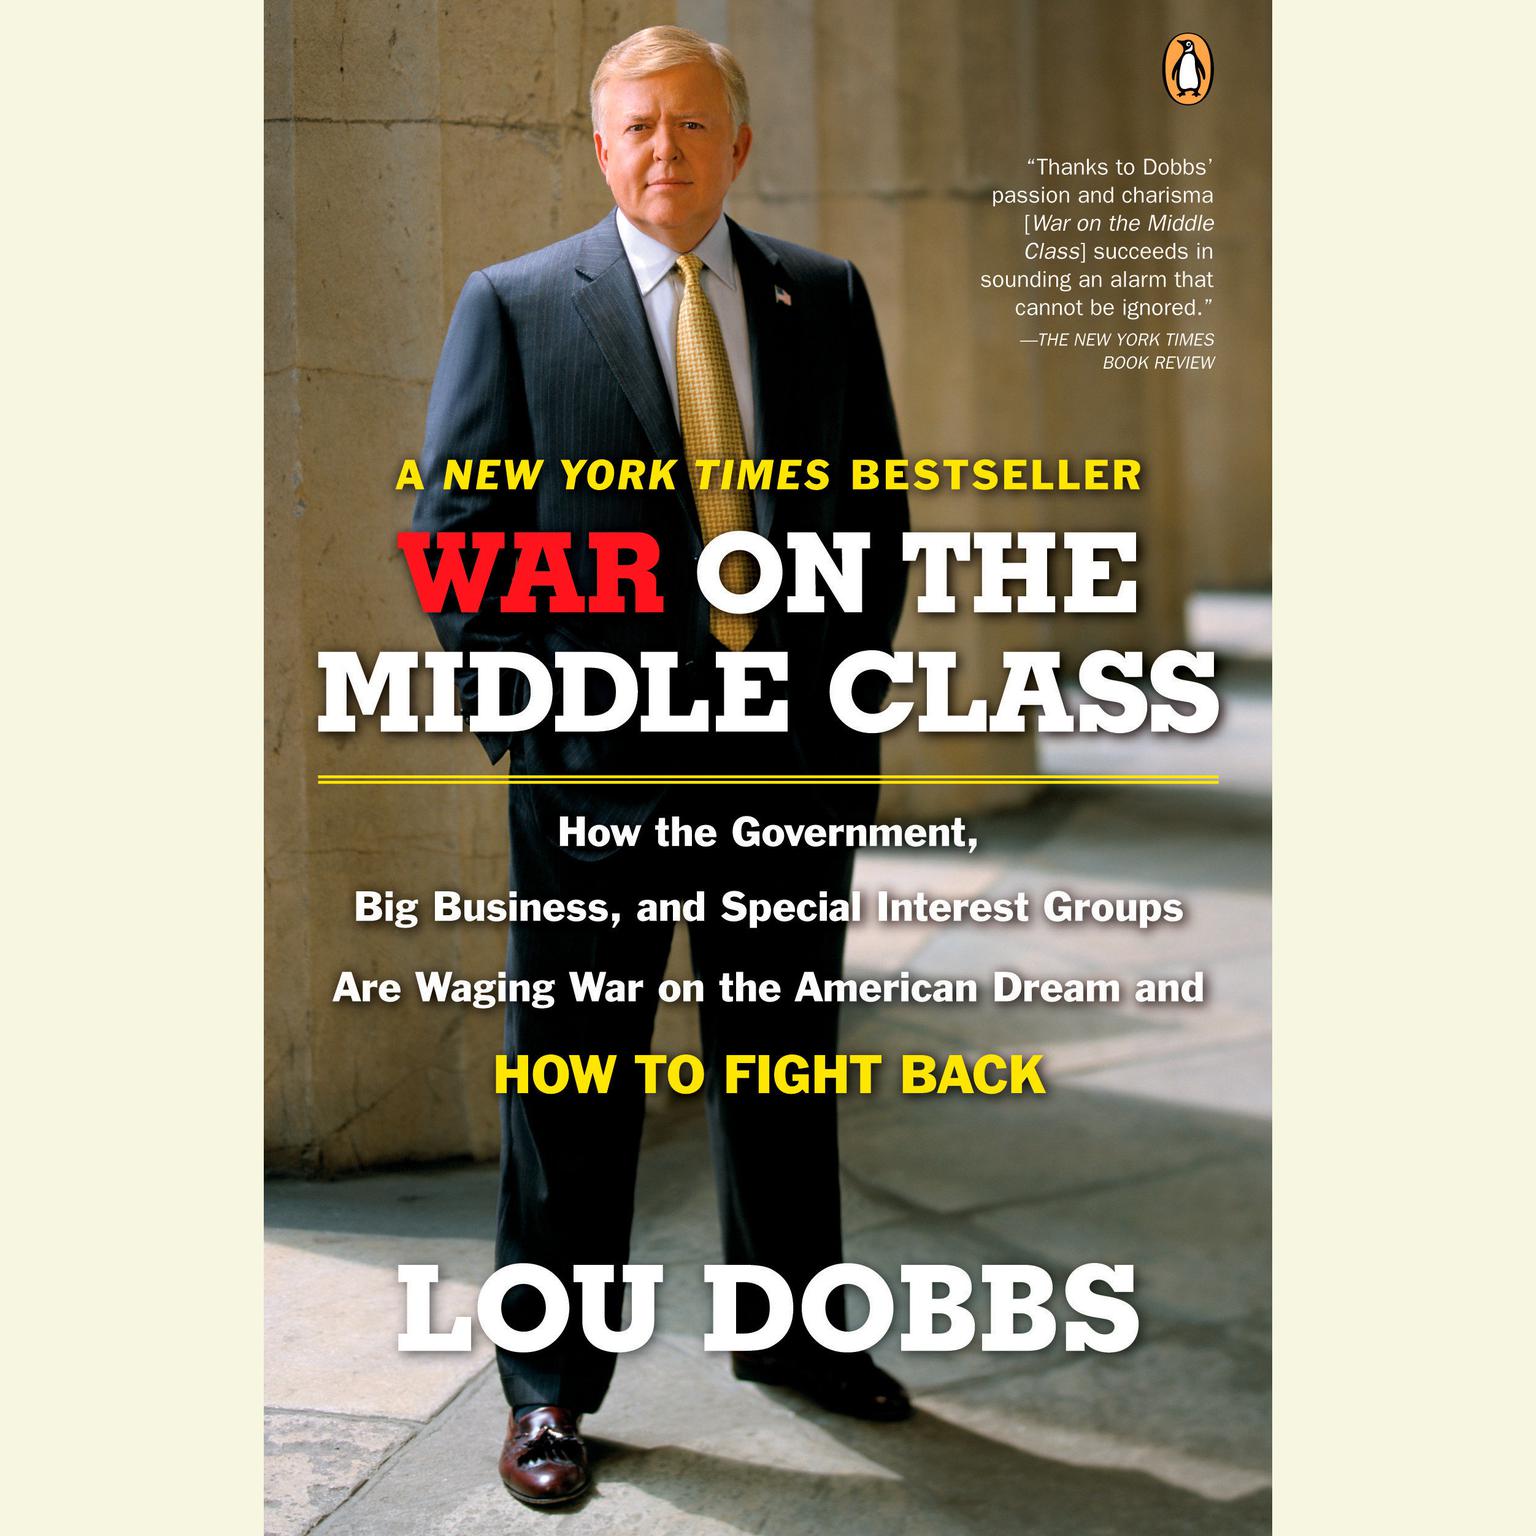 War on the Middle Class (Abridged): How the Government, Big Business, and Special Interest Groups Are Waging War ont he American Dream and How to Fight Back Audiobook, by Lou Dobbs